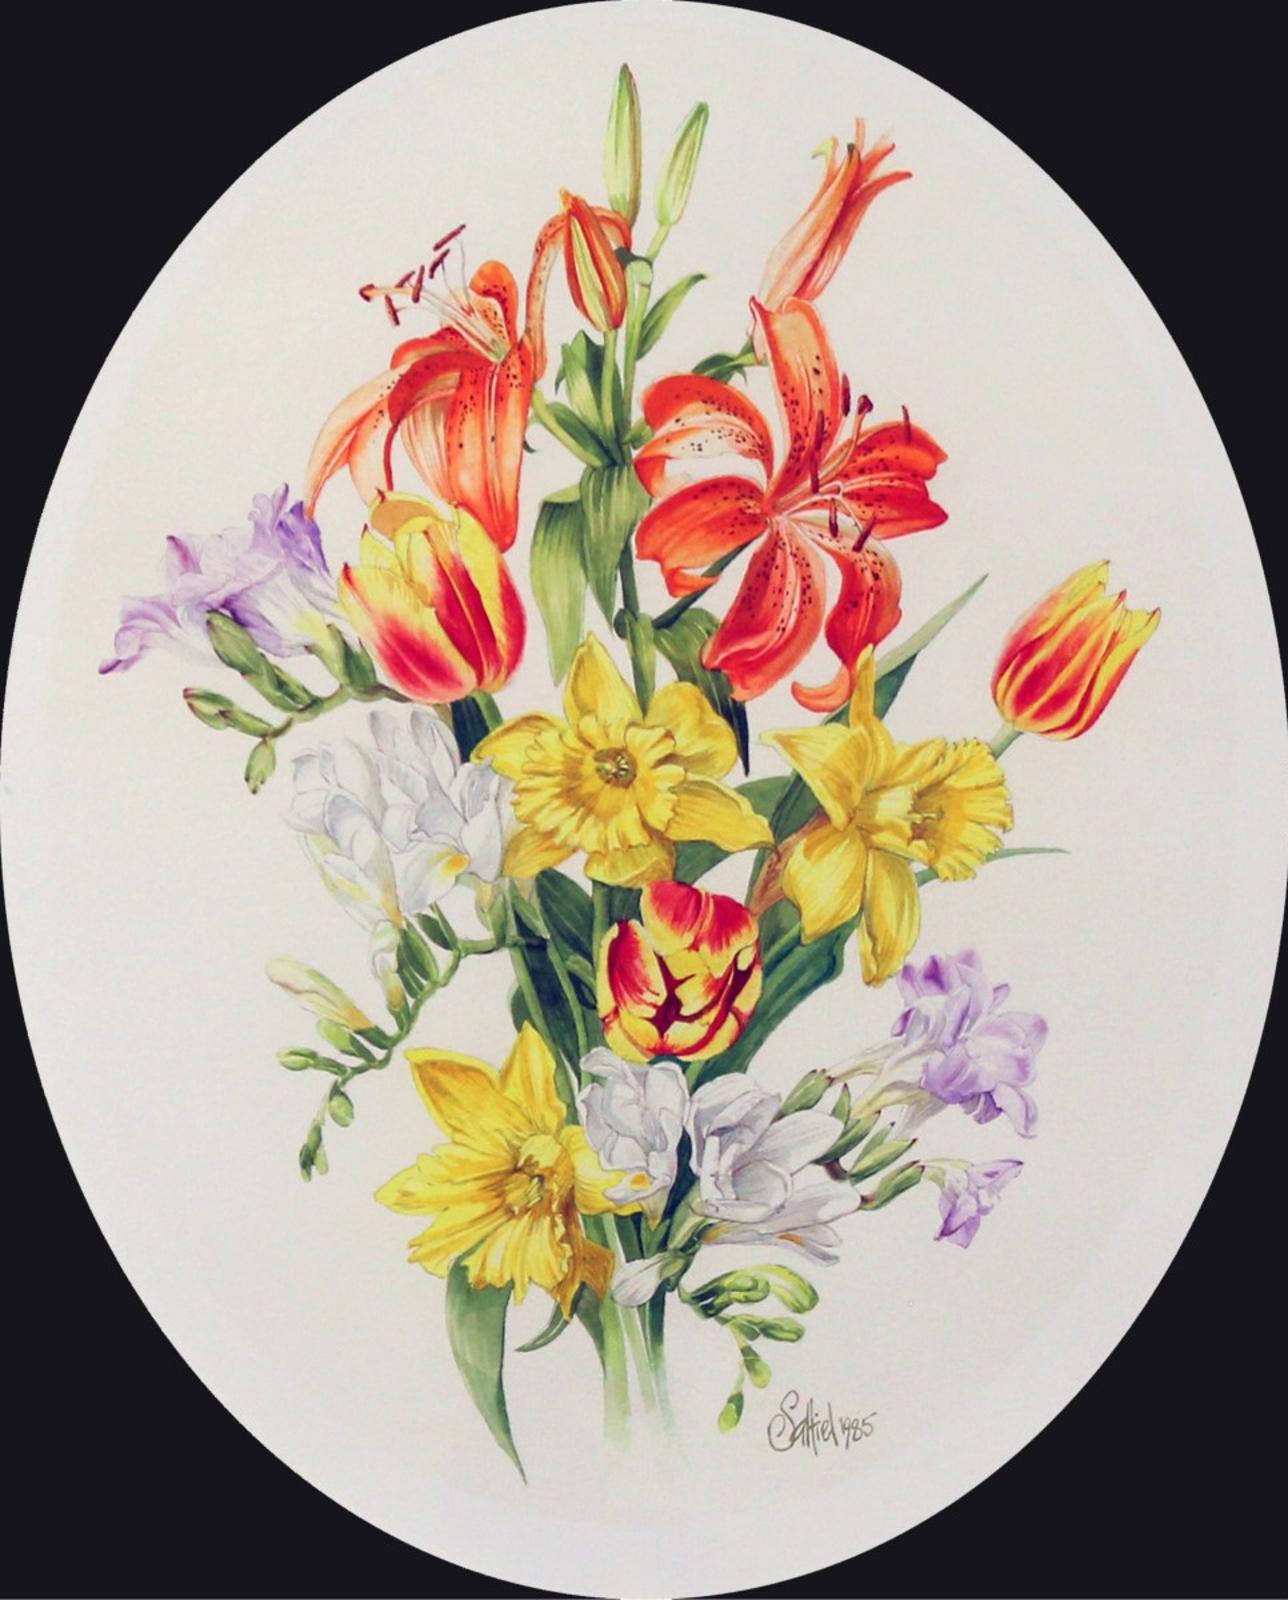 Alice Saltiel-Marshall (1948) - Spring Imported (Enchantment Lilies, Tulips, Daffodils and Freesias; 1985